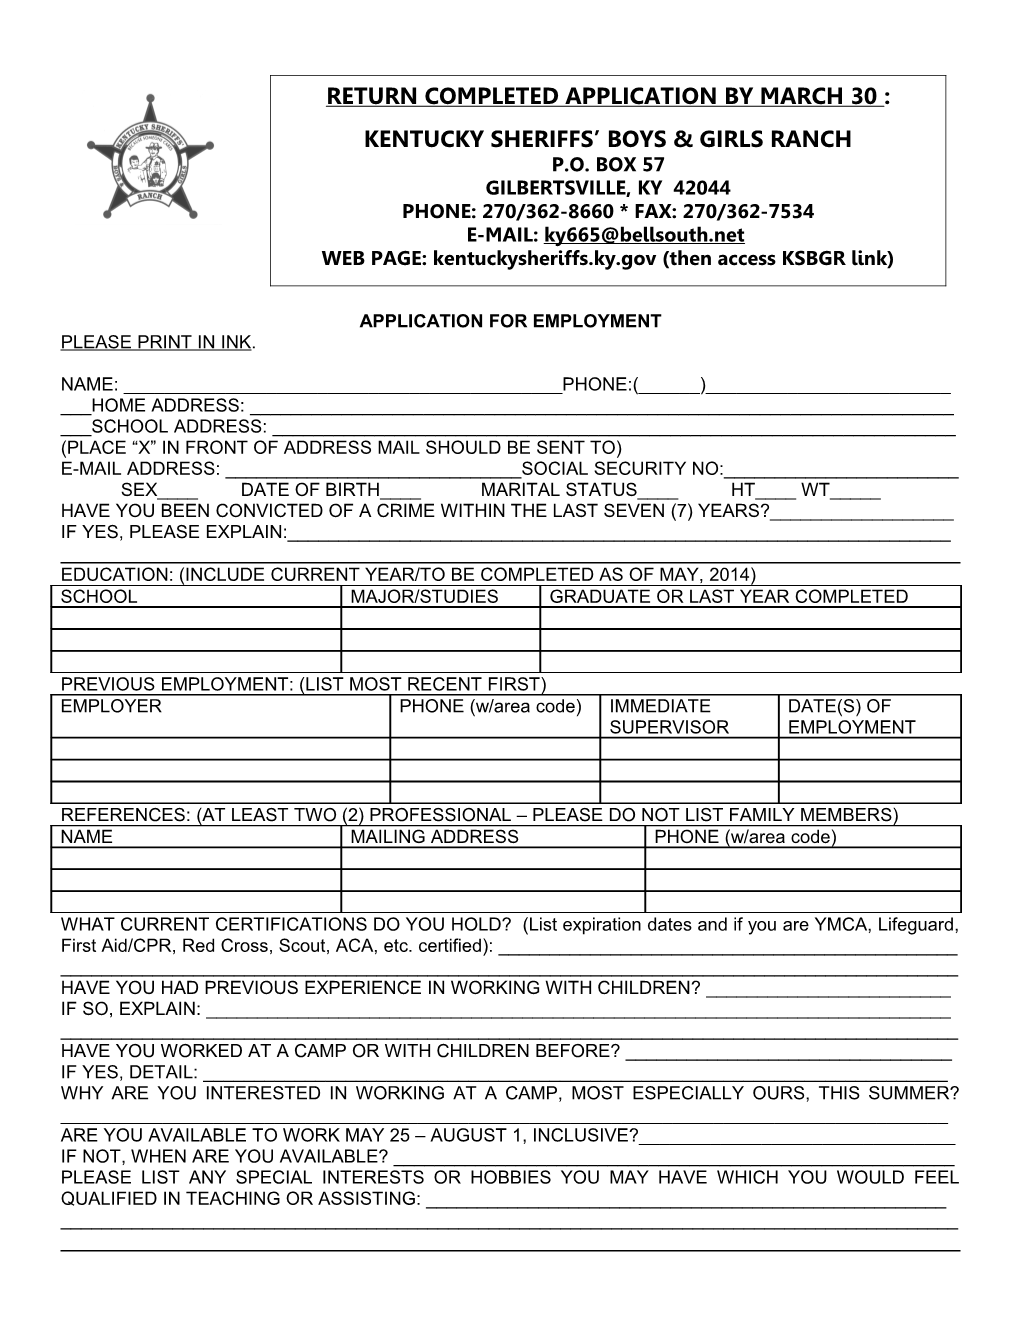 Application for Employment s105